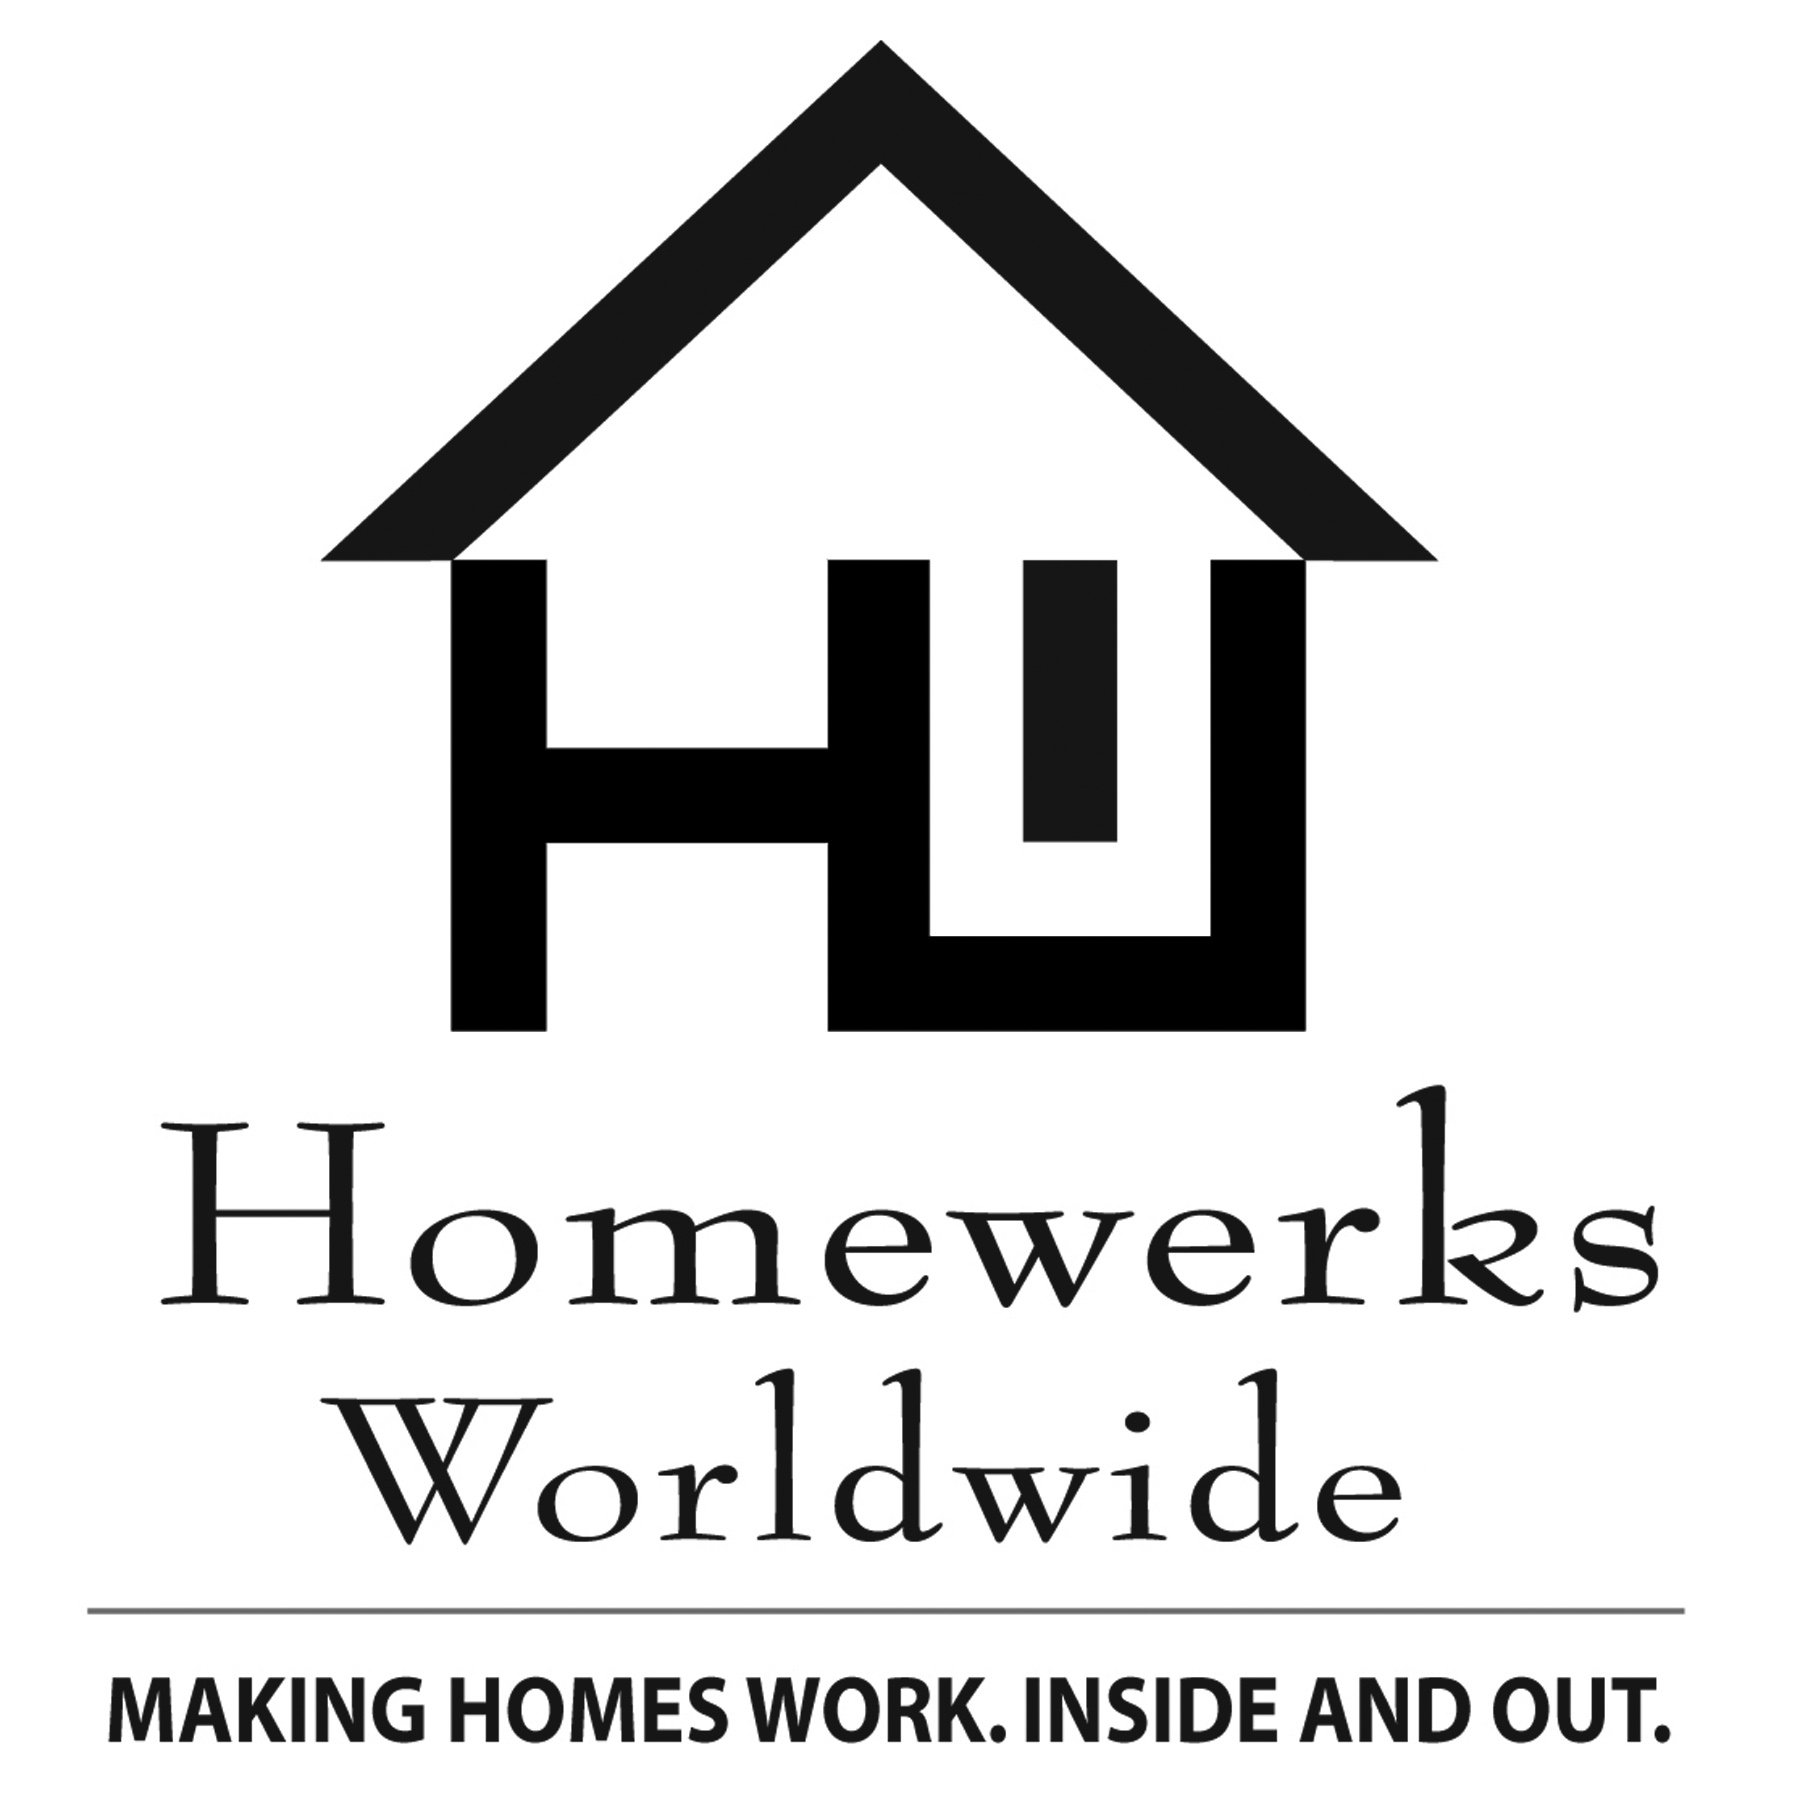  HW HOMEWERKS WORLDWIDE MAKING HOMES WORK. INSIDE AND OUT.